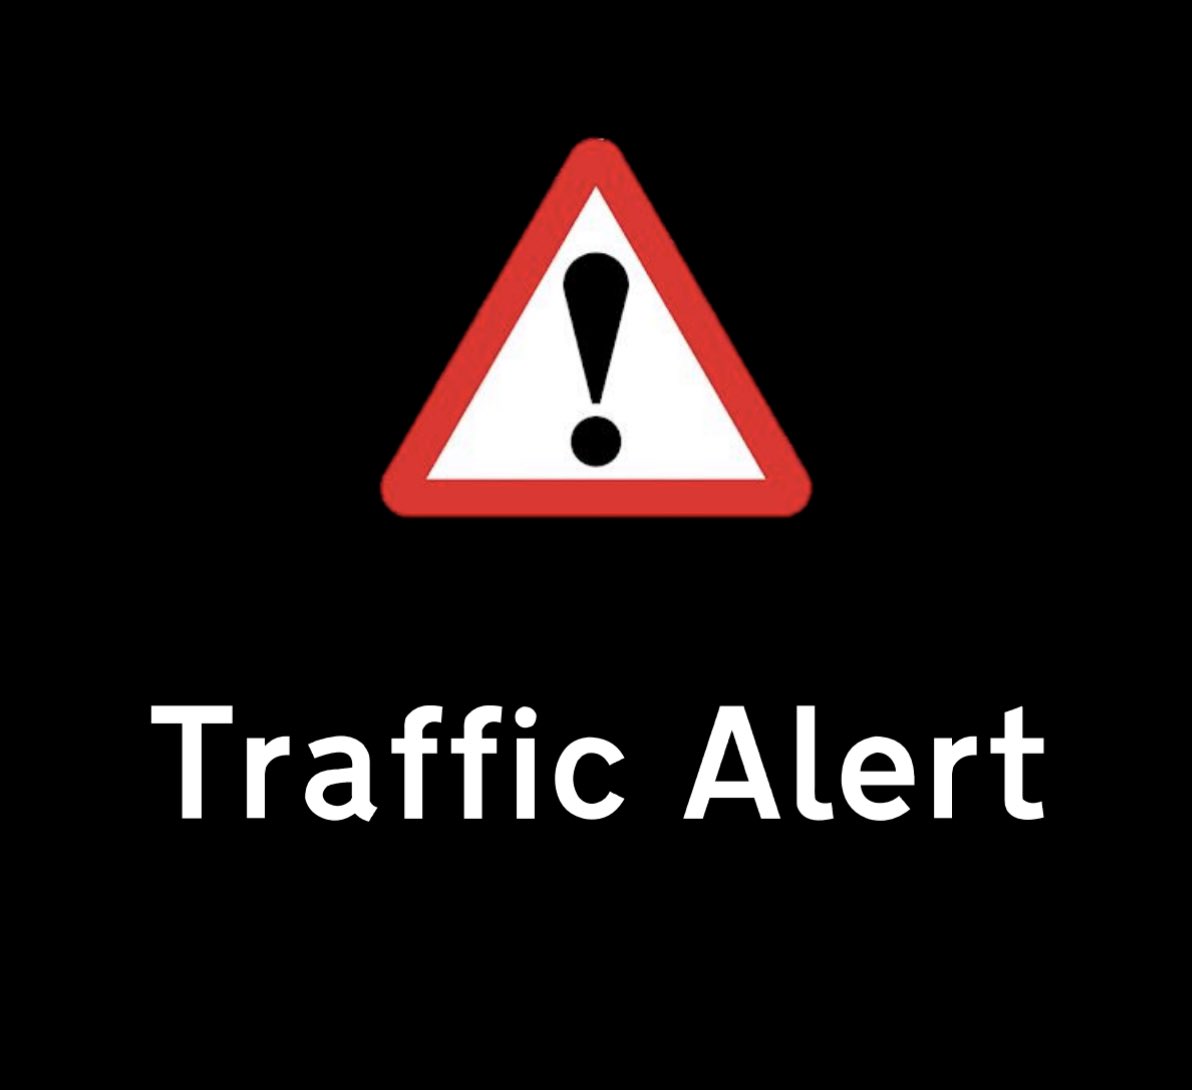 ⚠️ A38 Bromsgrove - severe delays due to temporary traffic lights south of Puddlewharf Roundabout reportedly stuck on red. Northbound traffic is currently back to M5 J5 and southbound traffic is back to Charford Road/ Stoke Road.